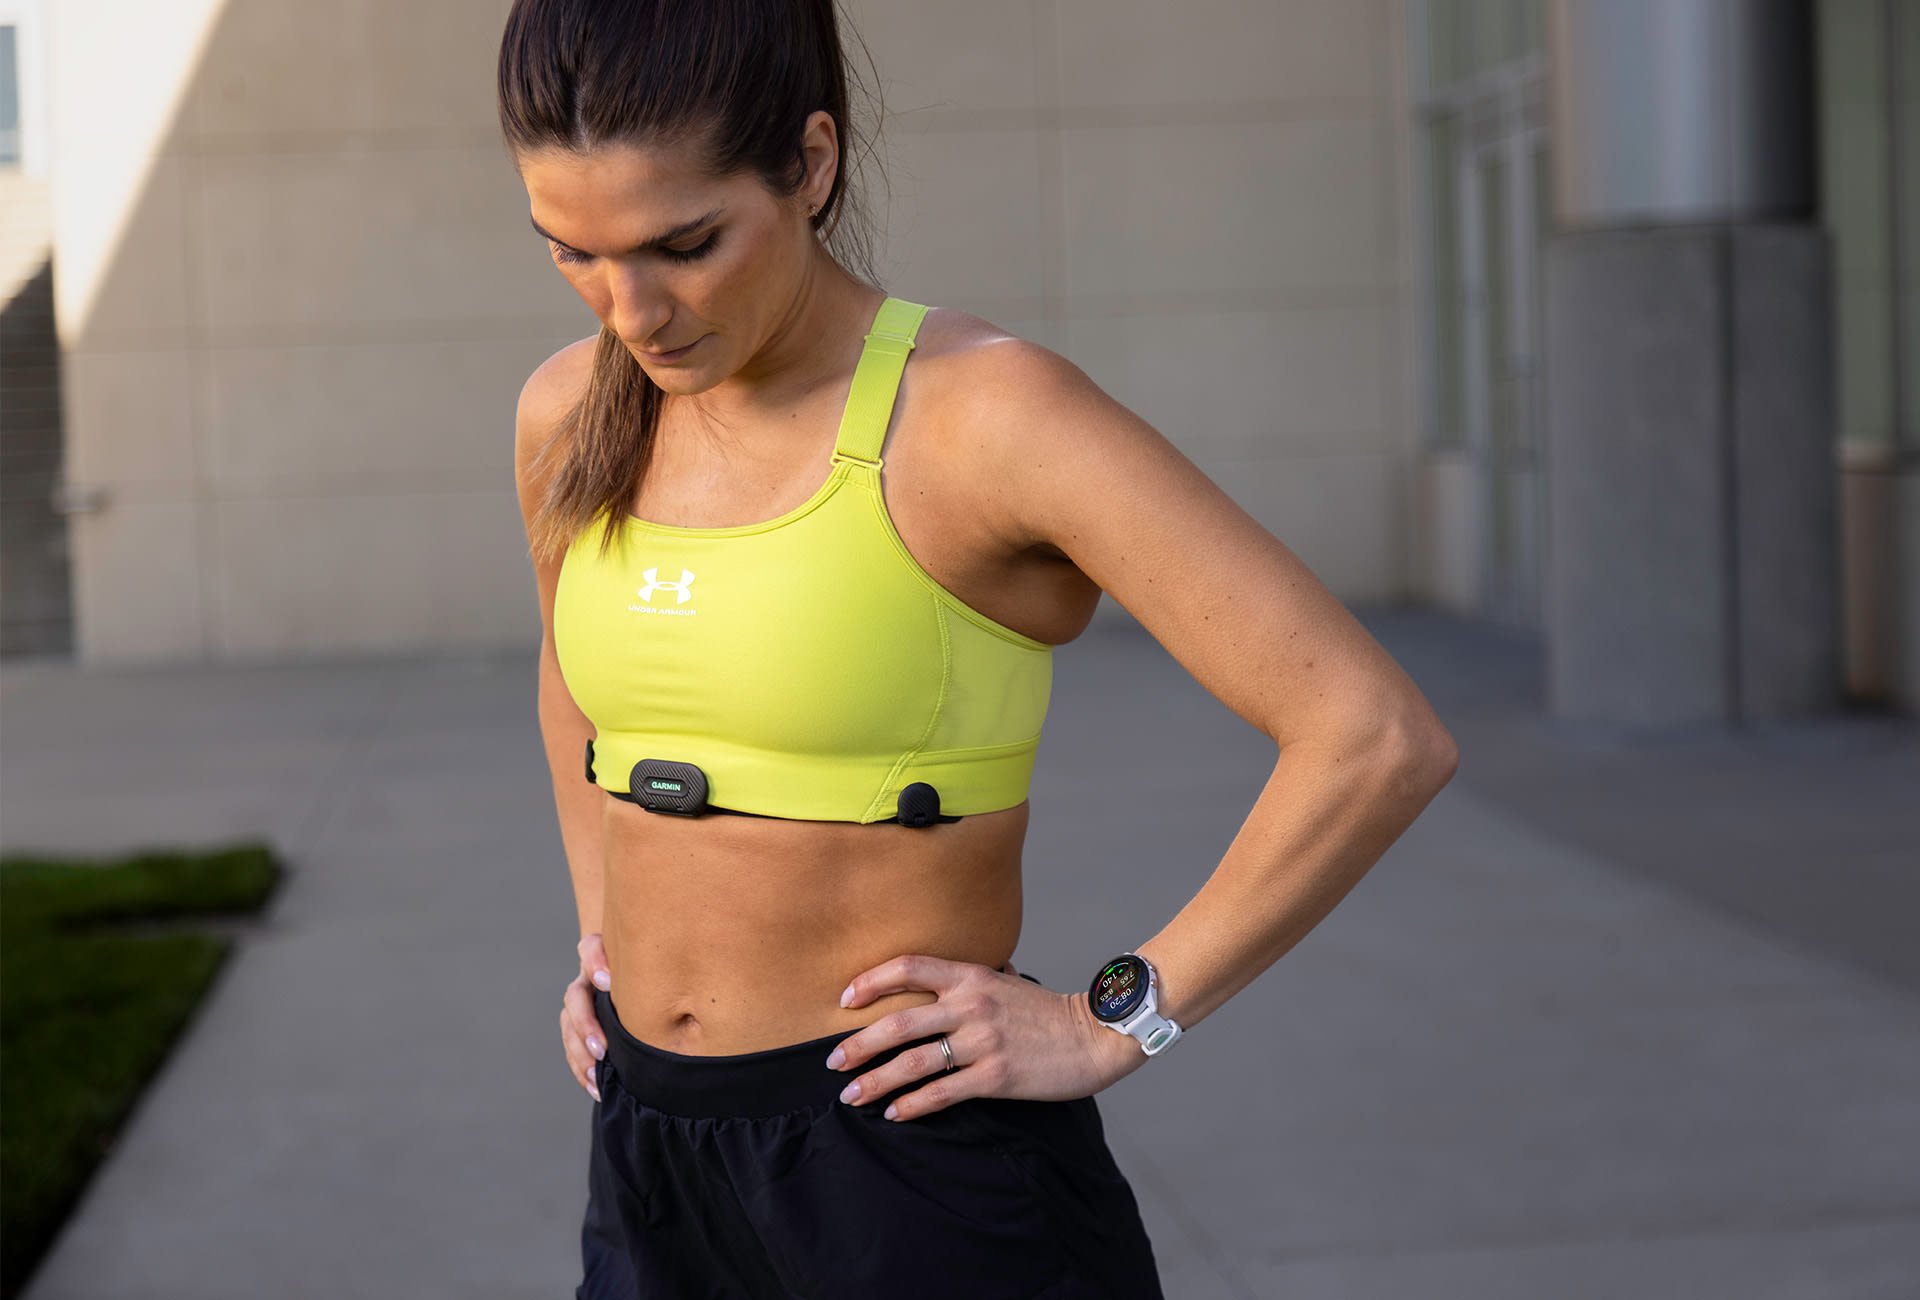 Unleash your strength and style with our high impact sports bra